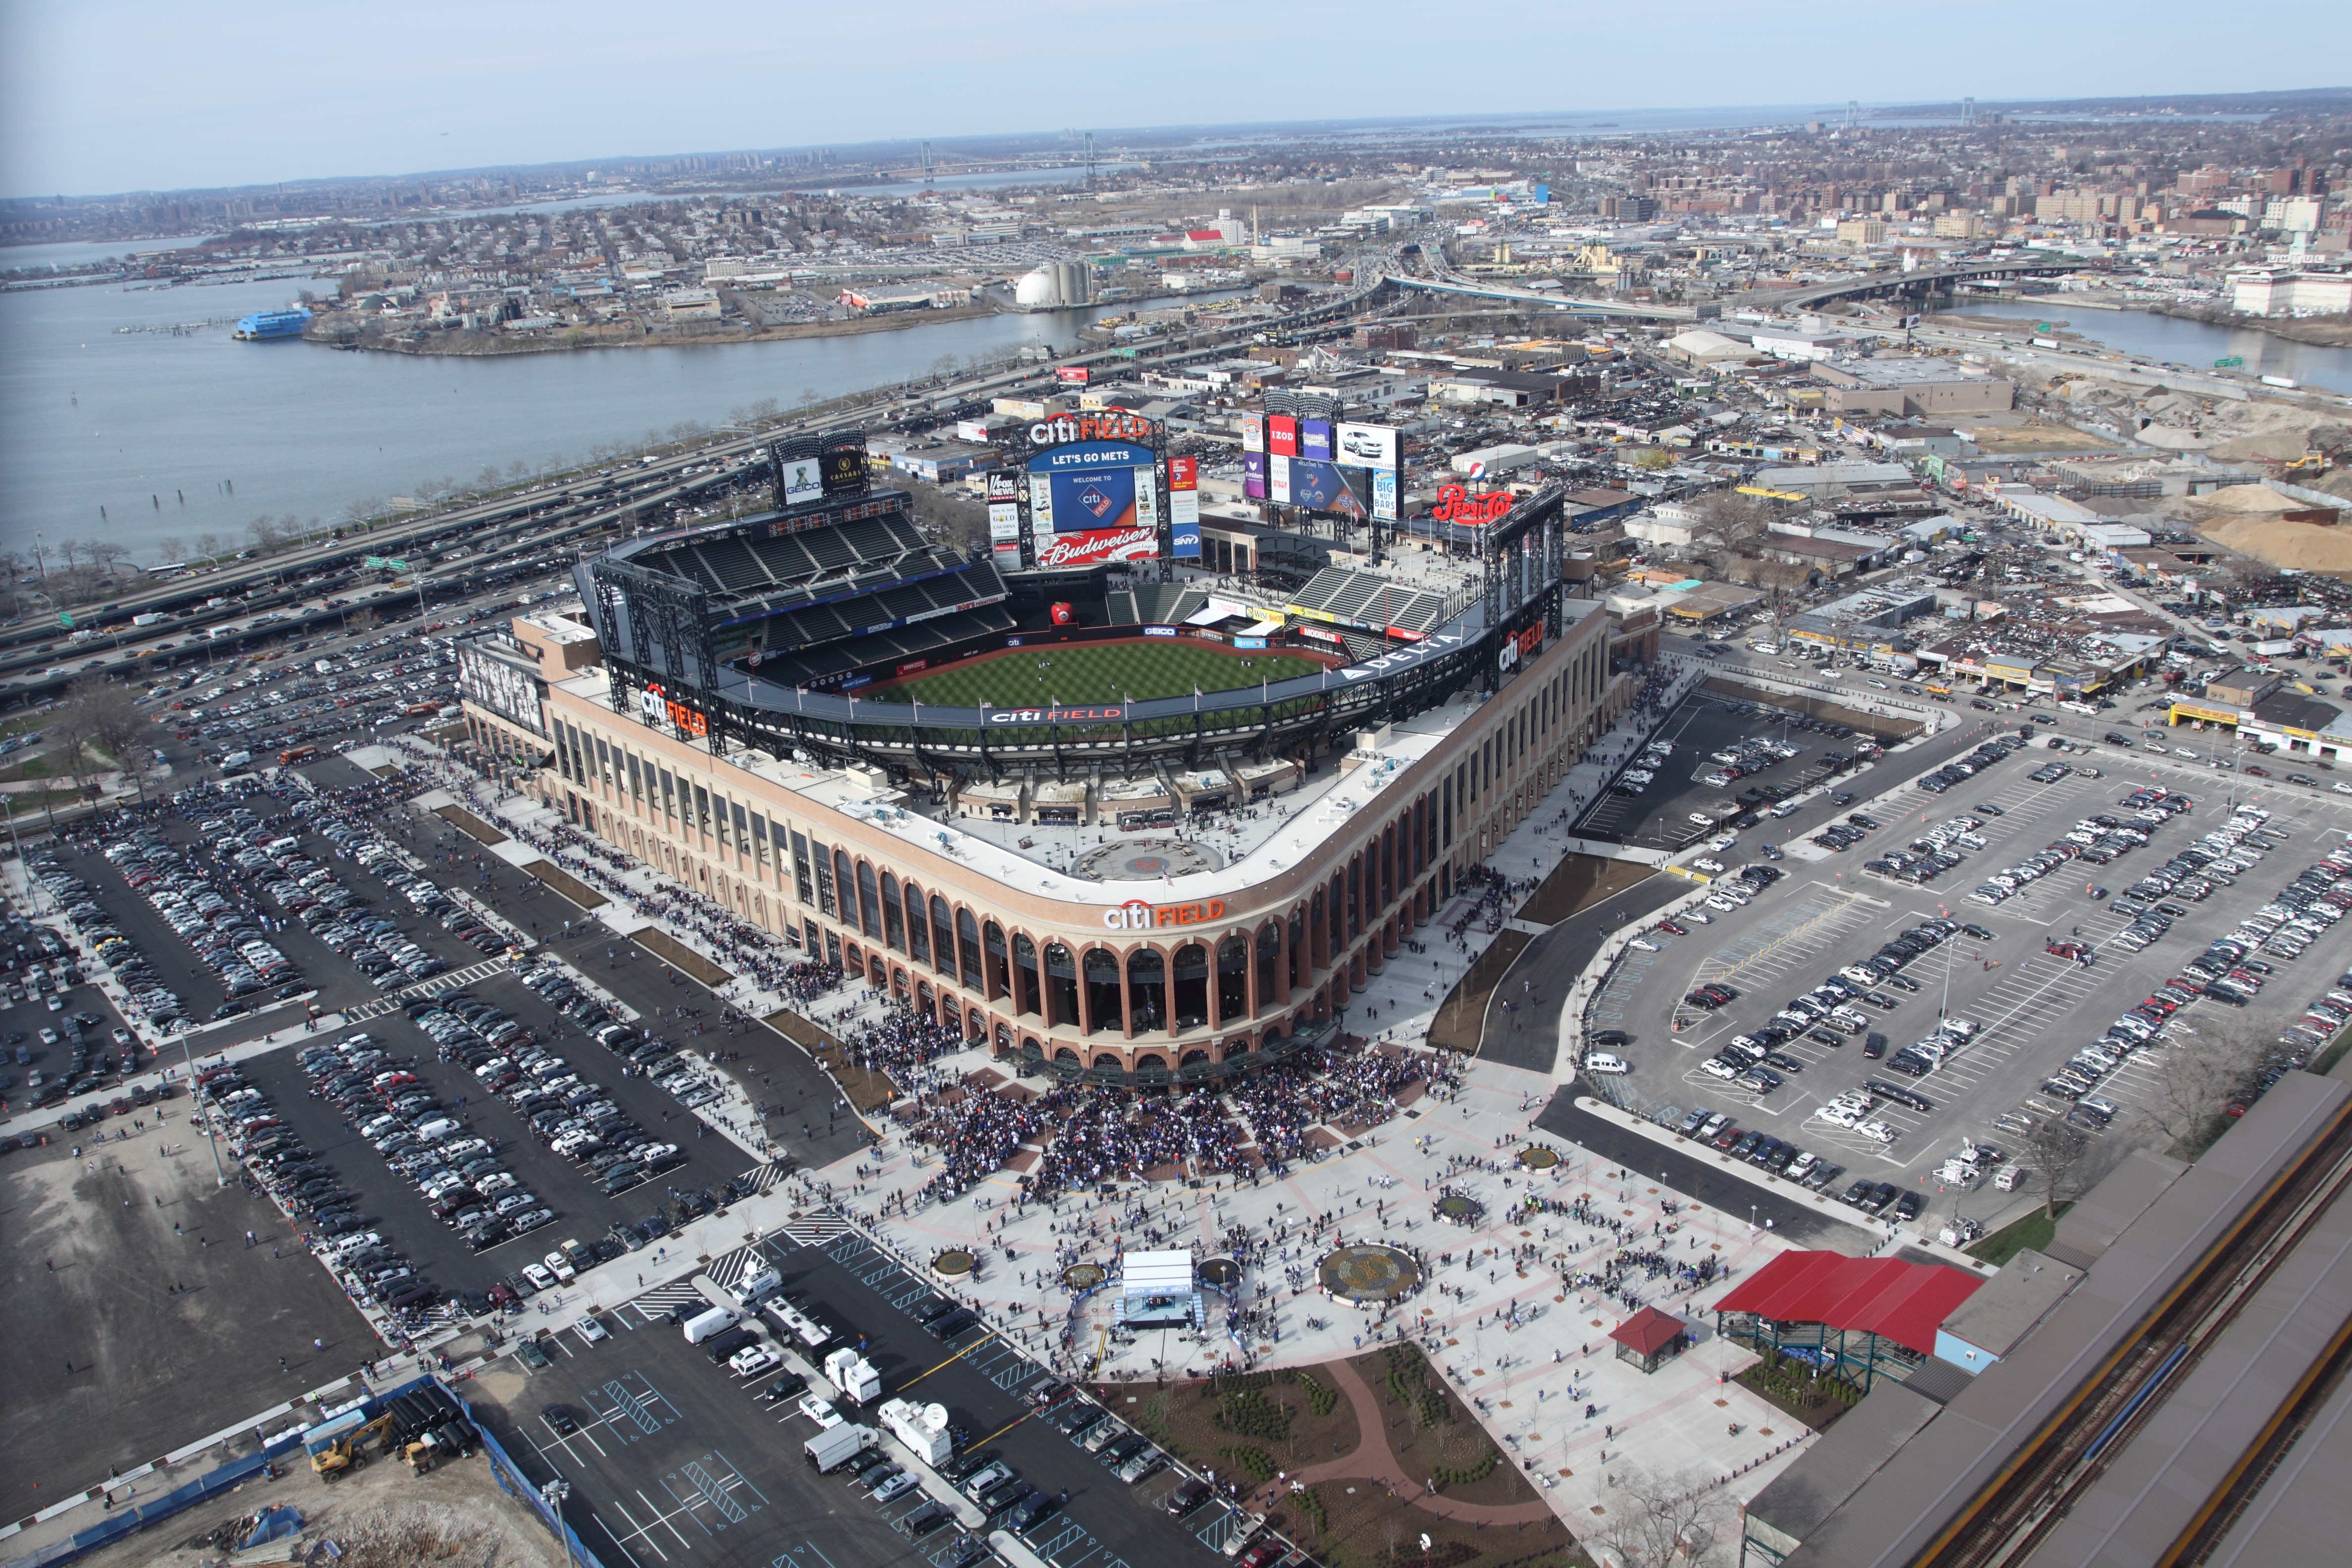 Aerial Shot of Citi Field Opening Day April 13th 2009